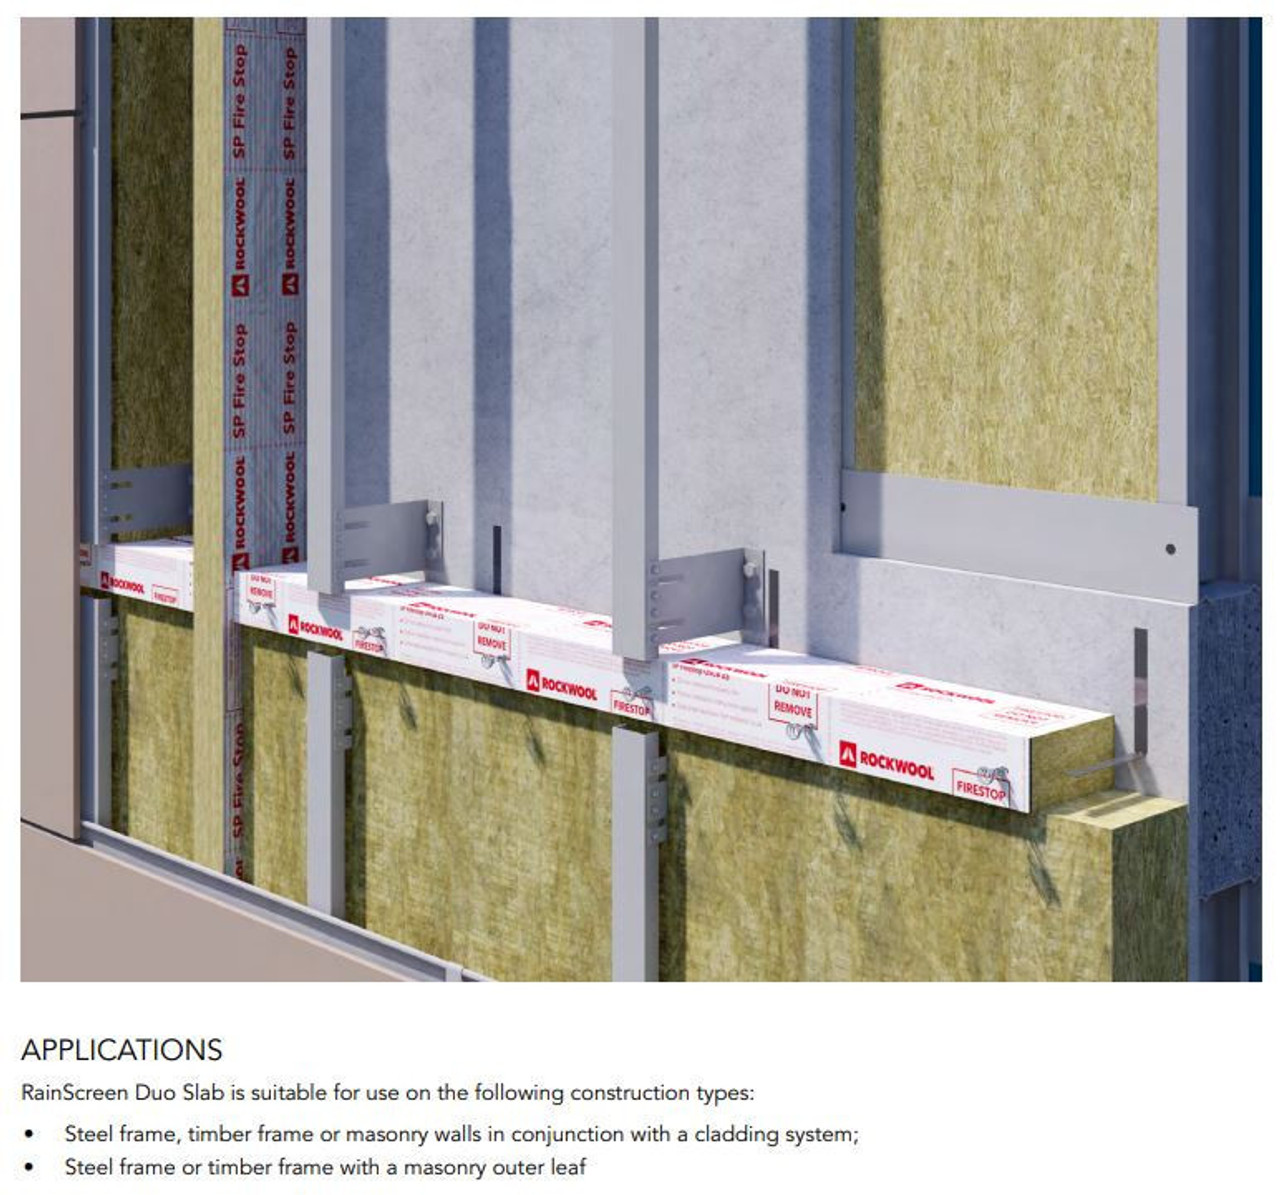 125mm Rainscreen- Rockwool  Duo slab -  Fire Insulation - Ventialted Cladding - 34.56m2 Pallet  221352 RKW-50690-125